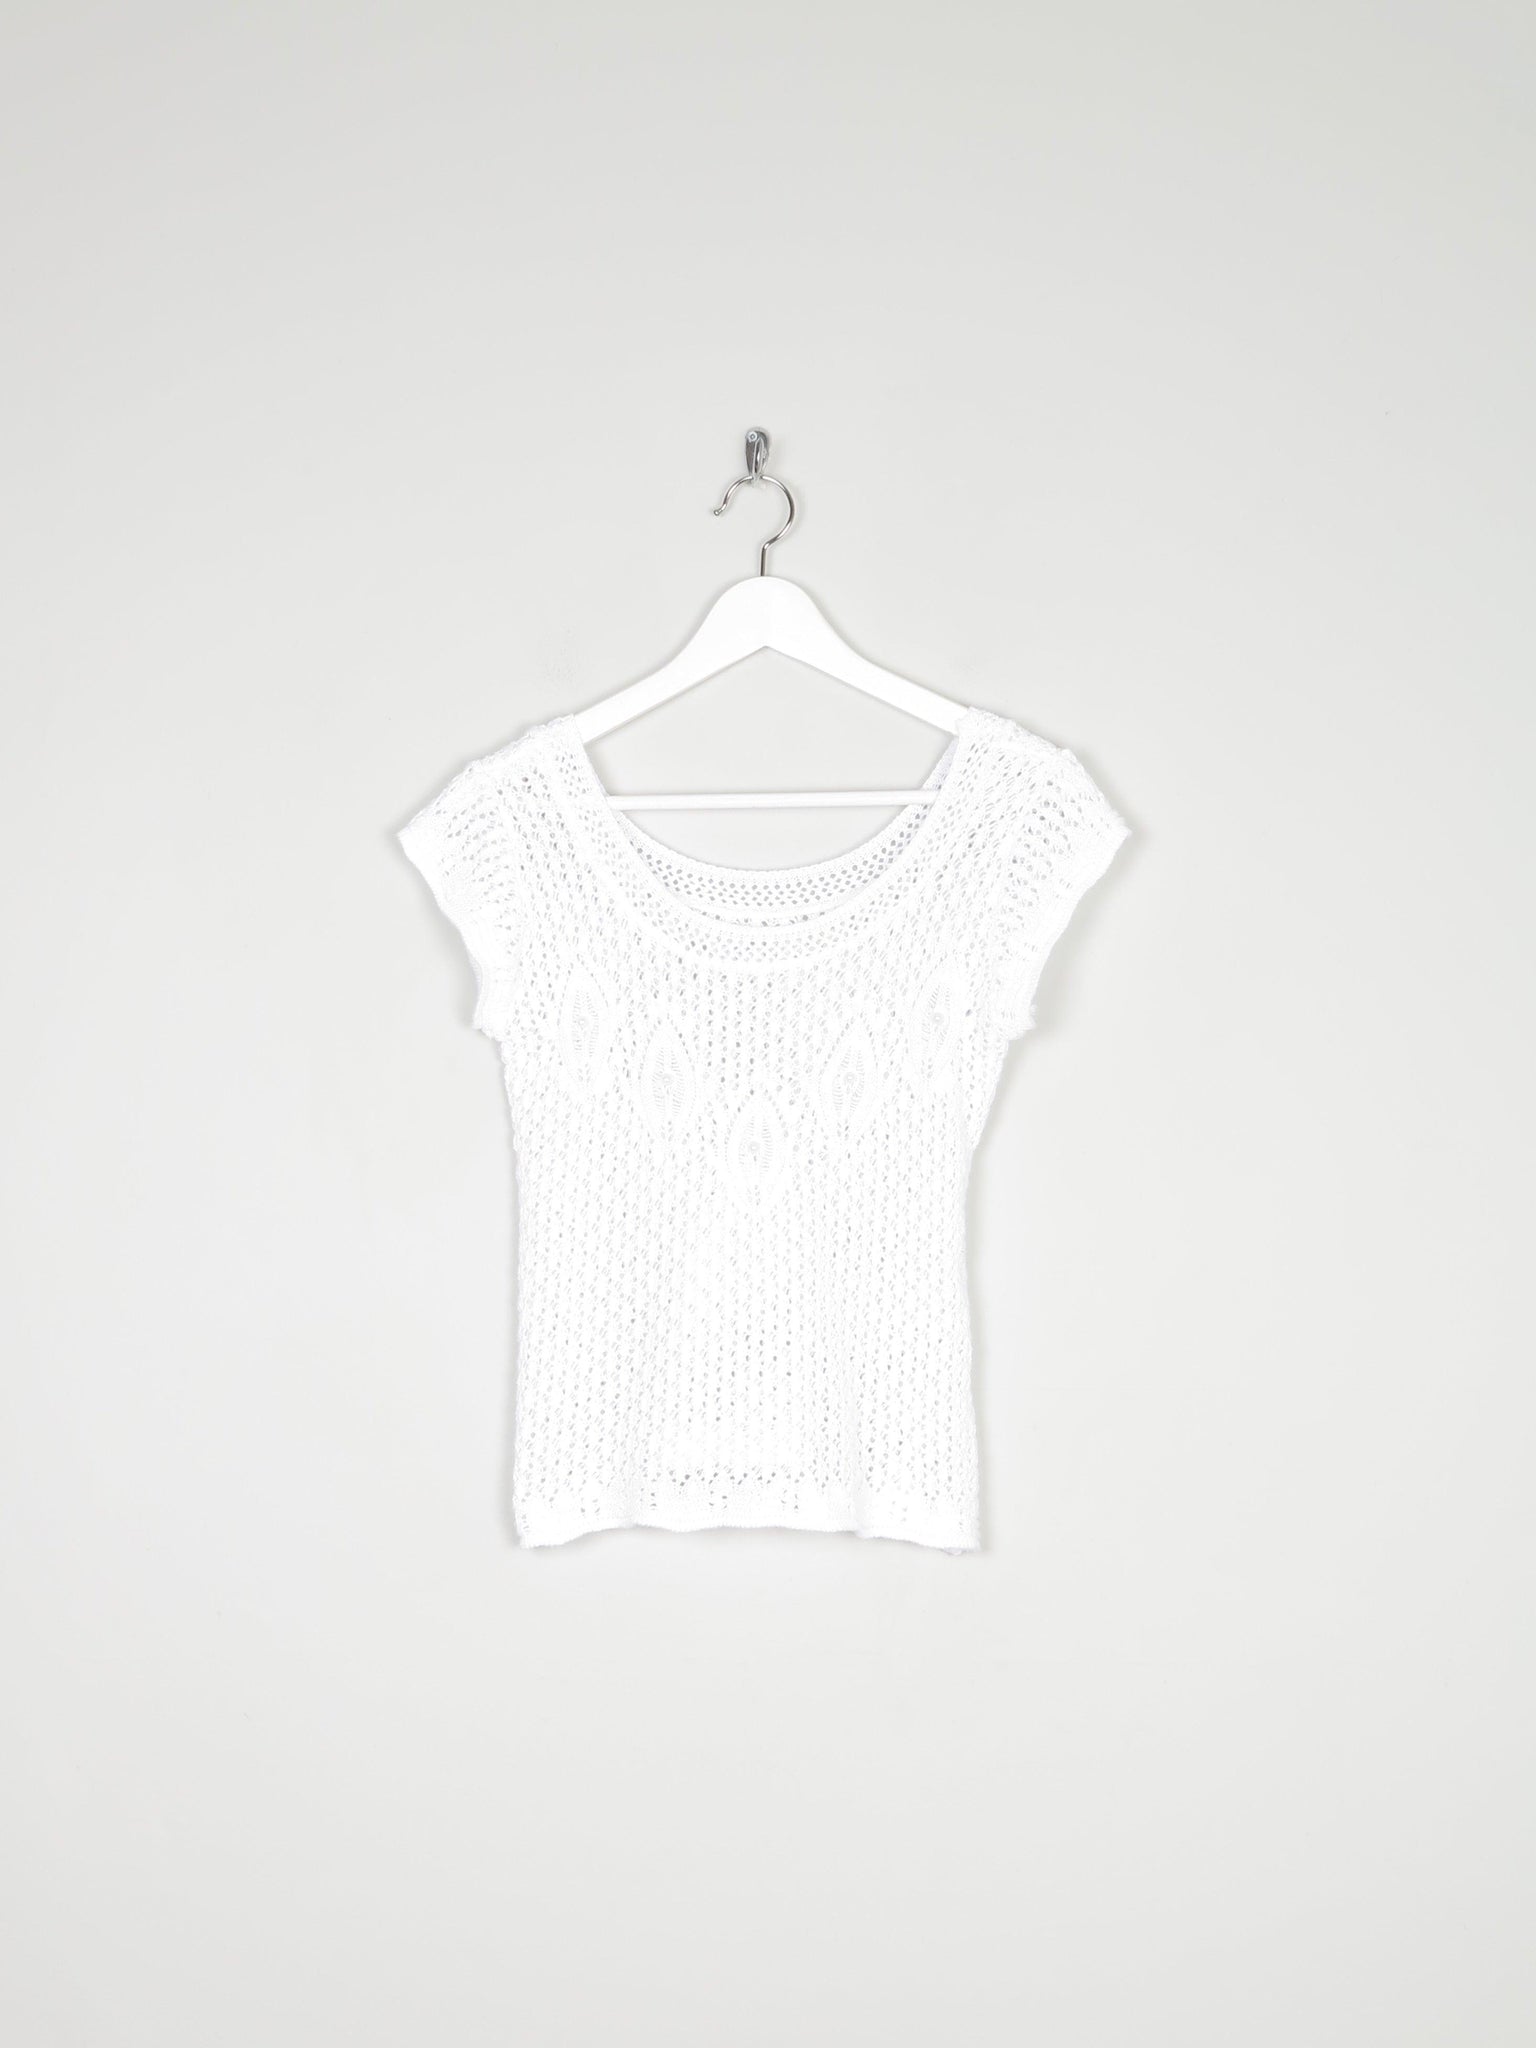 Women’s White Crochet 1970s Fitted Top S - The Harlequin